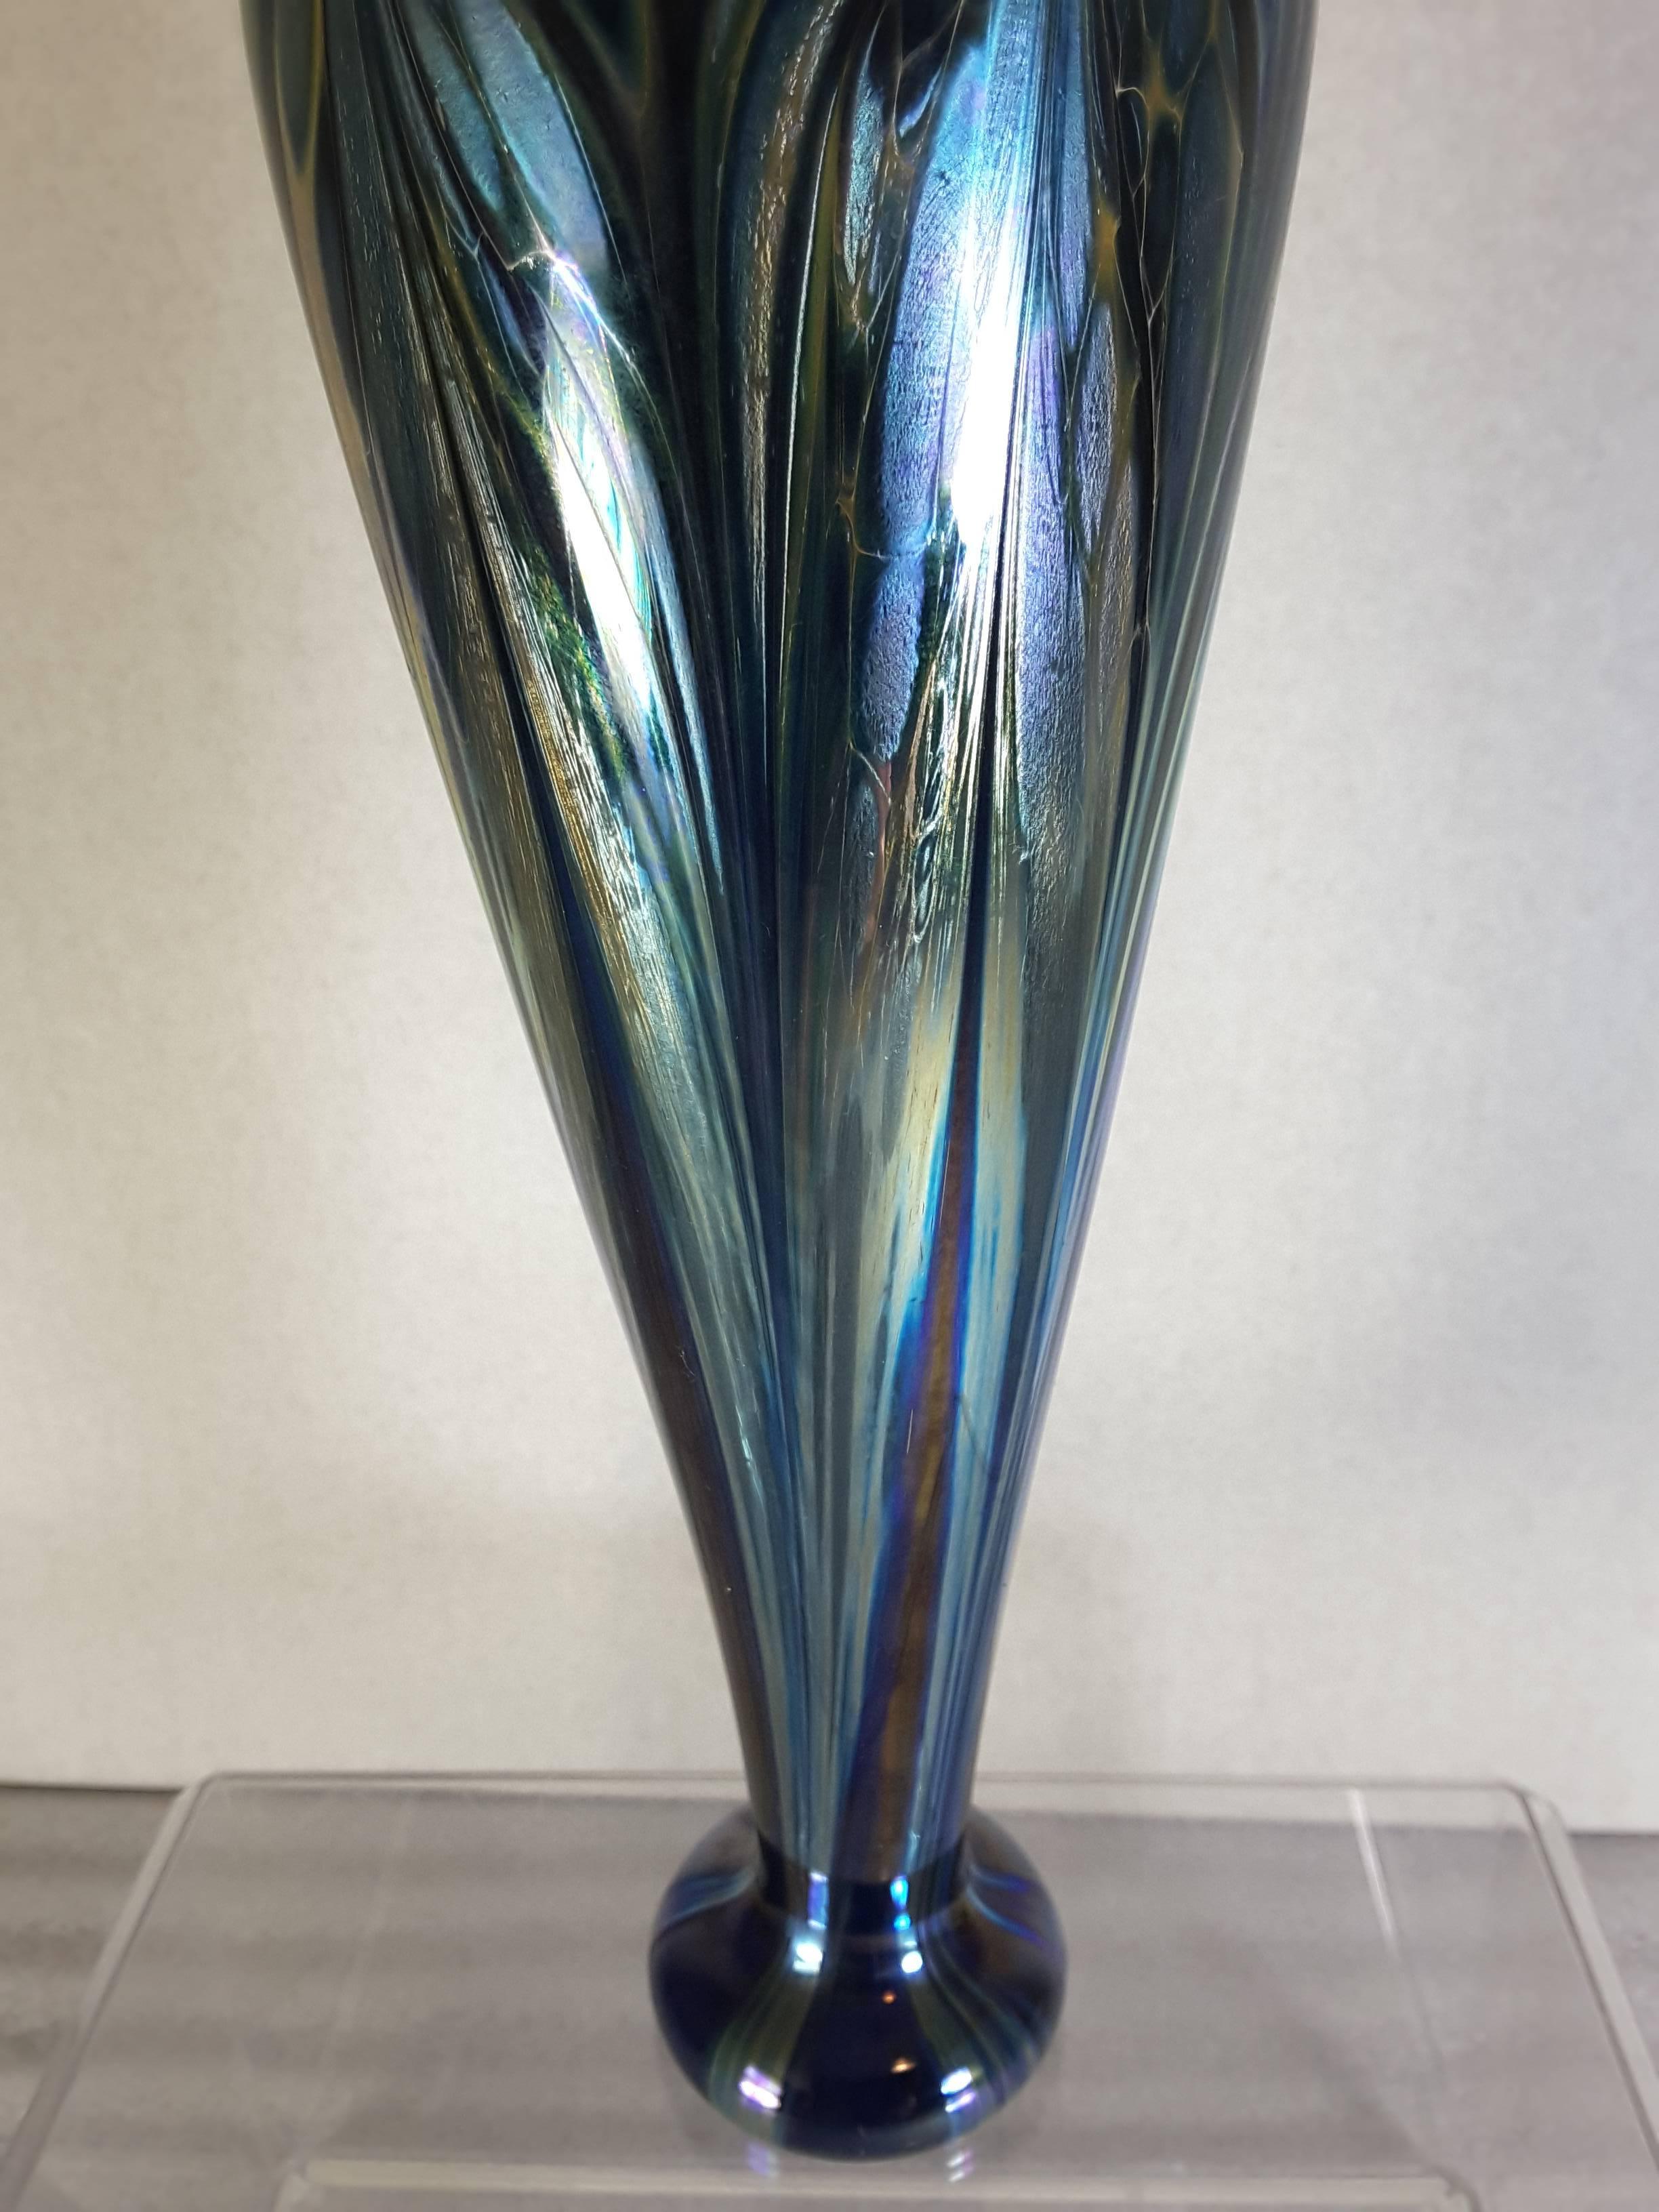 Glass Kent Fiske Iridescent Oil Spot on Water Pulled Feather Vase Signed & Dated 1984